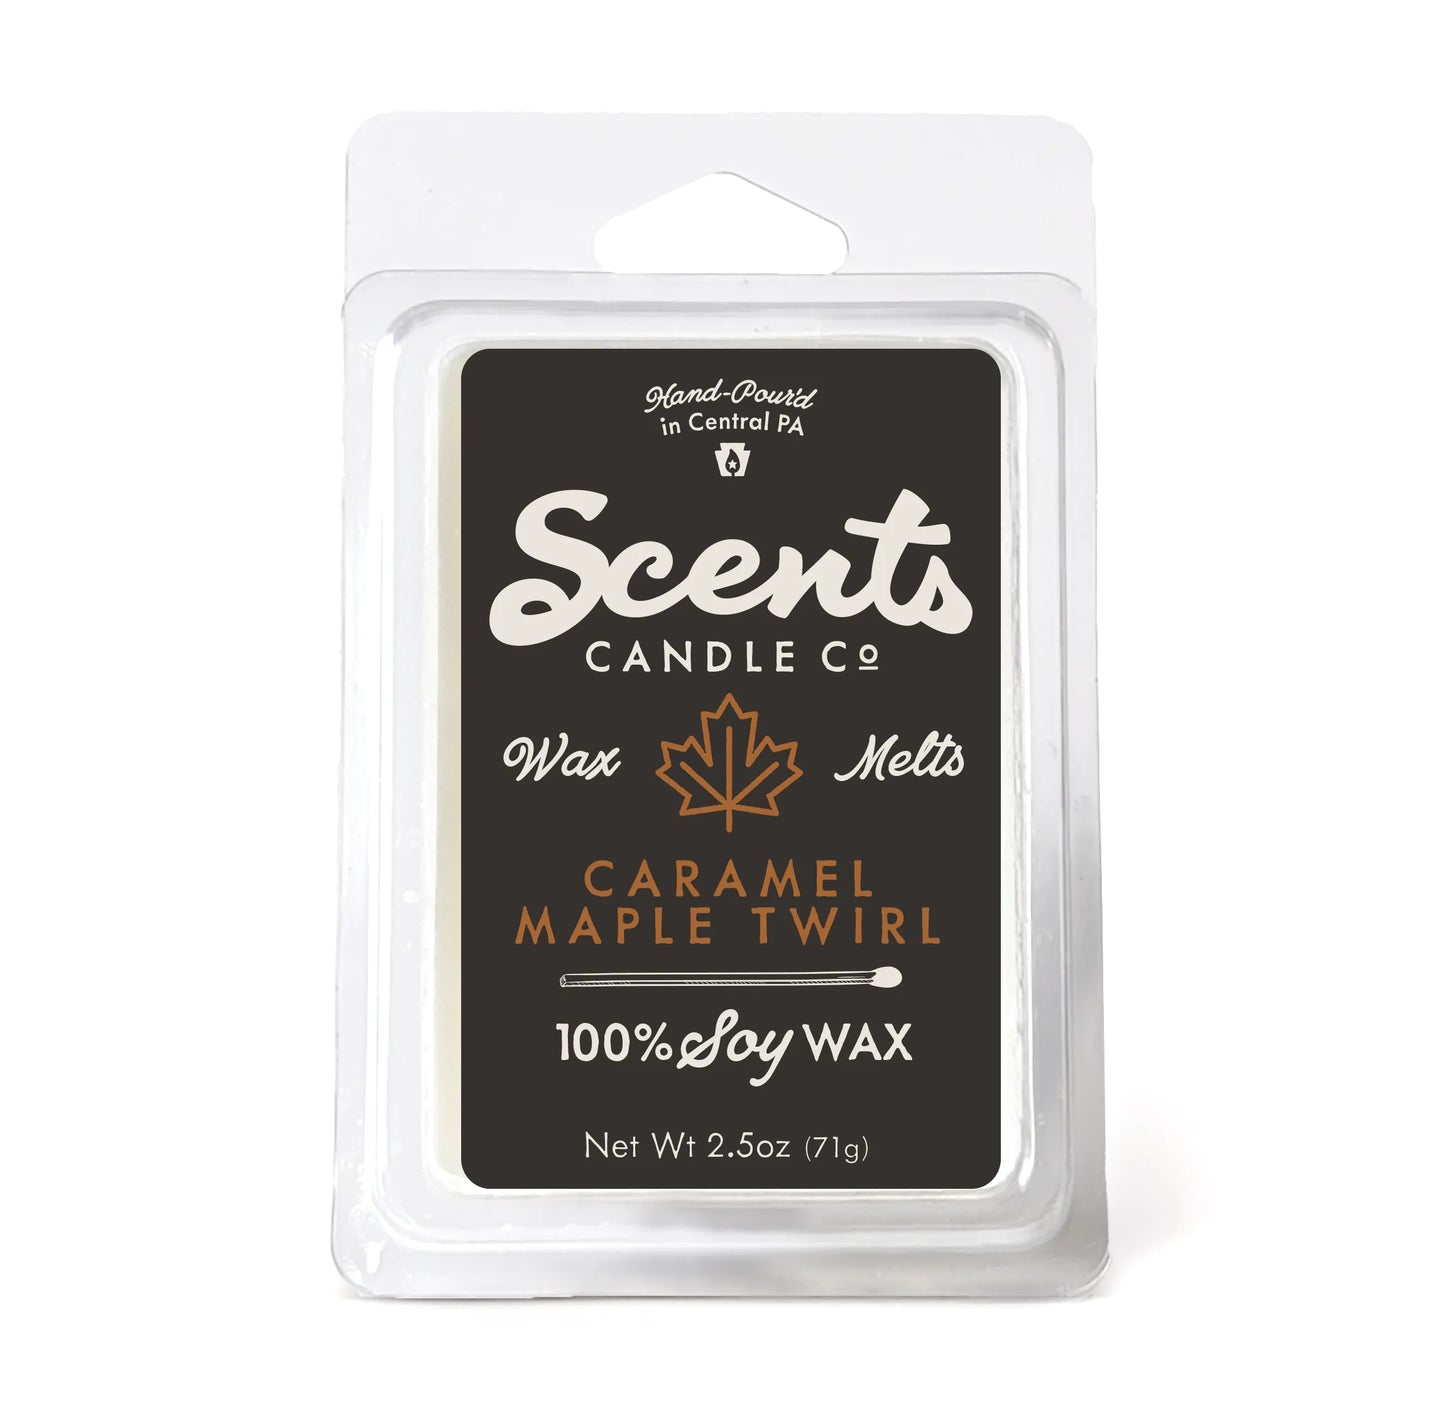 Scents Candle Co. Caramel Maple Swirl Wax Melt